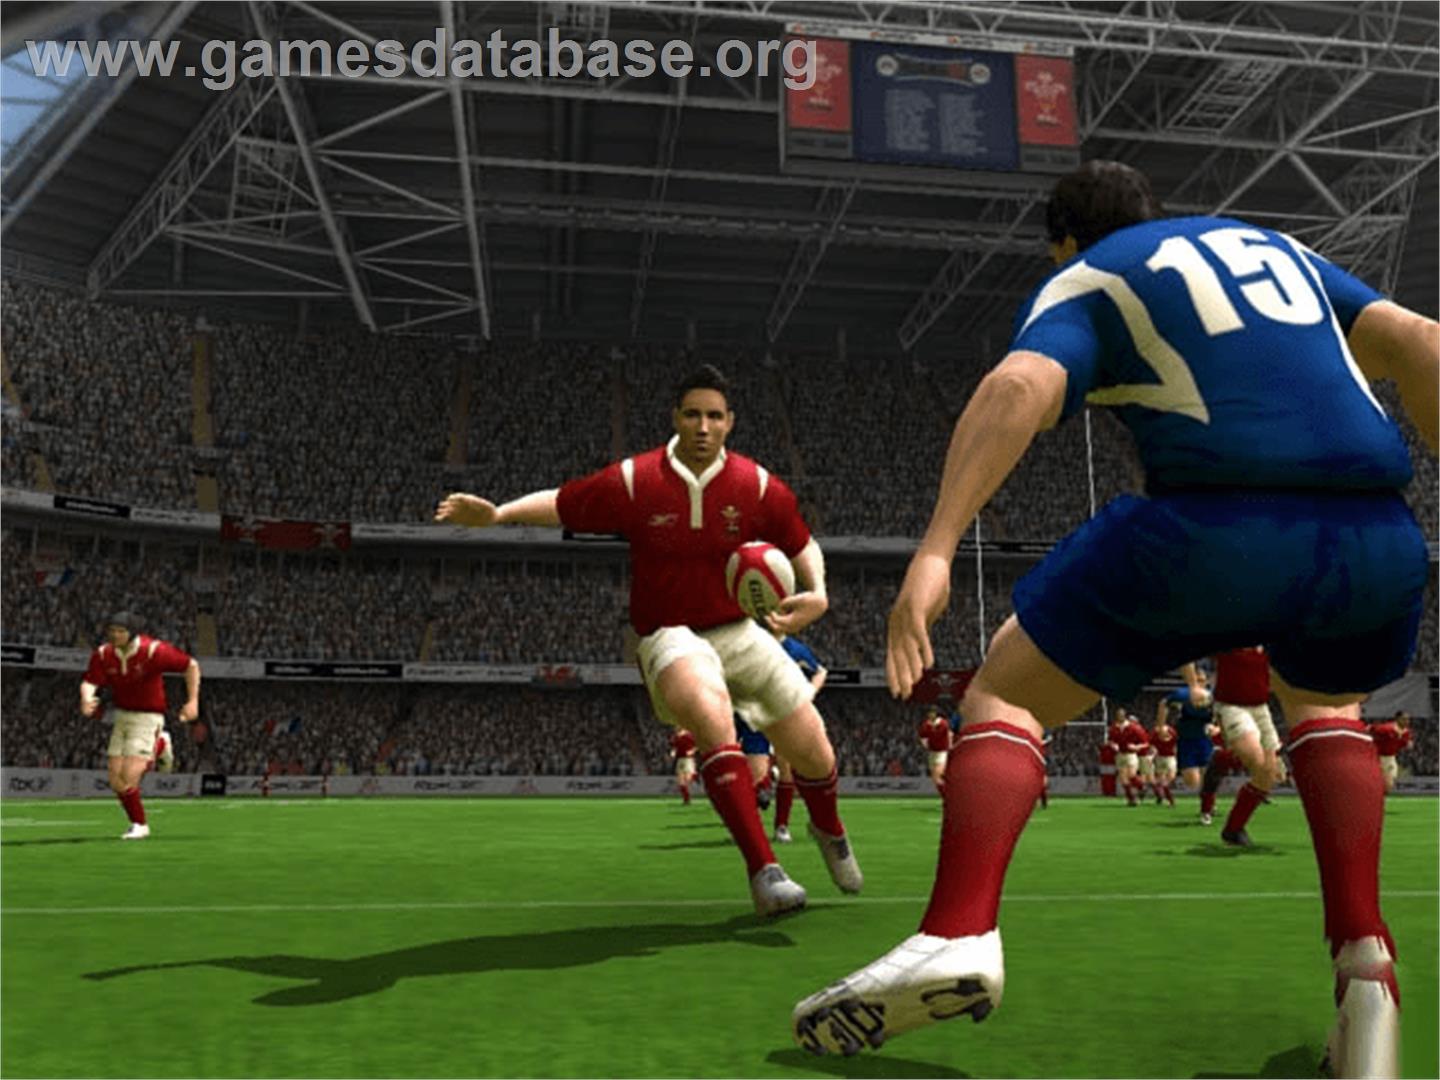 Rugby 2005 - Microsoft Xbox - Artwork - In Game